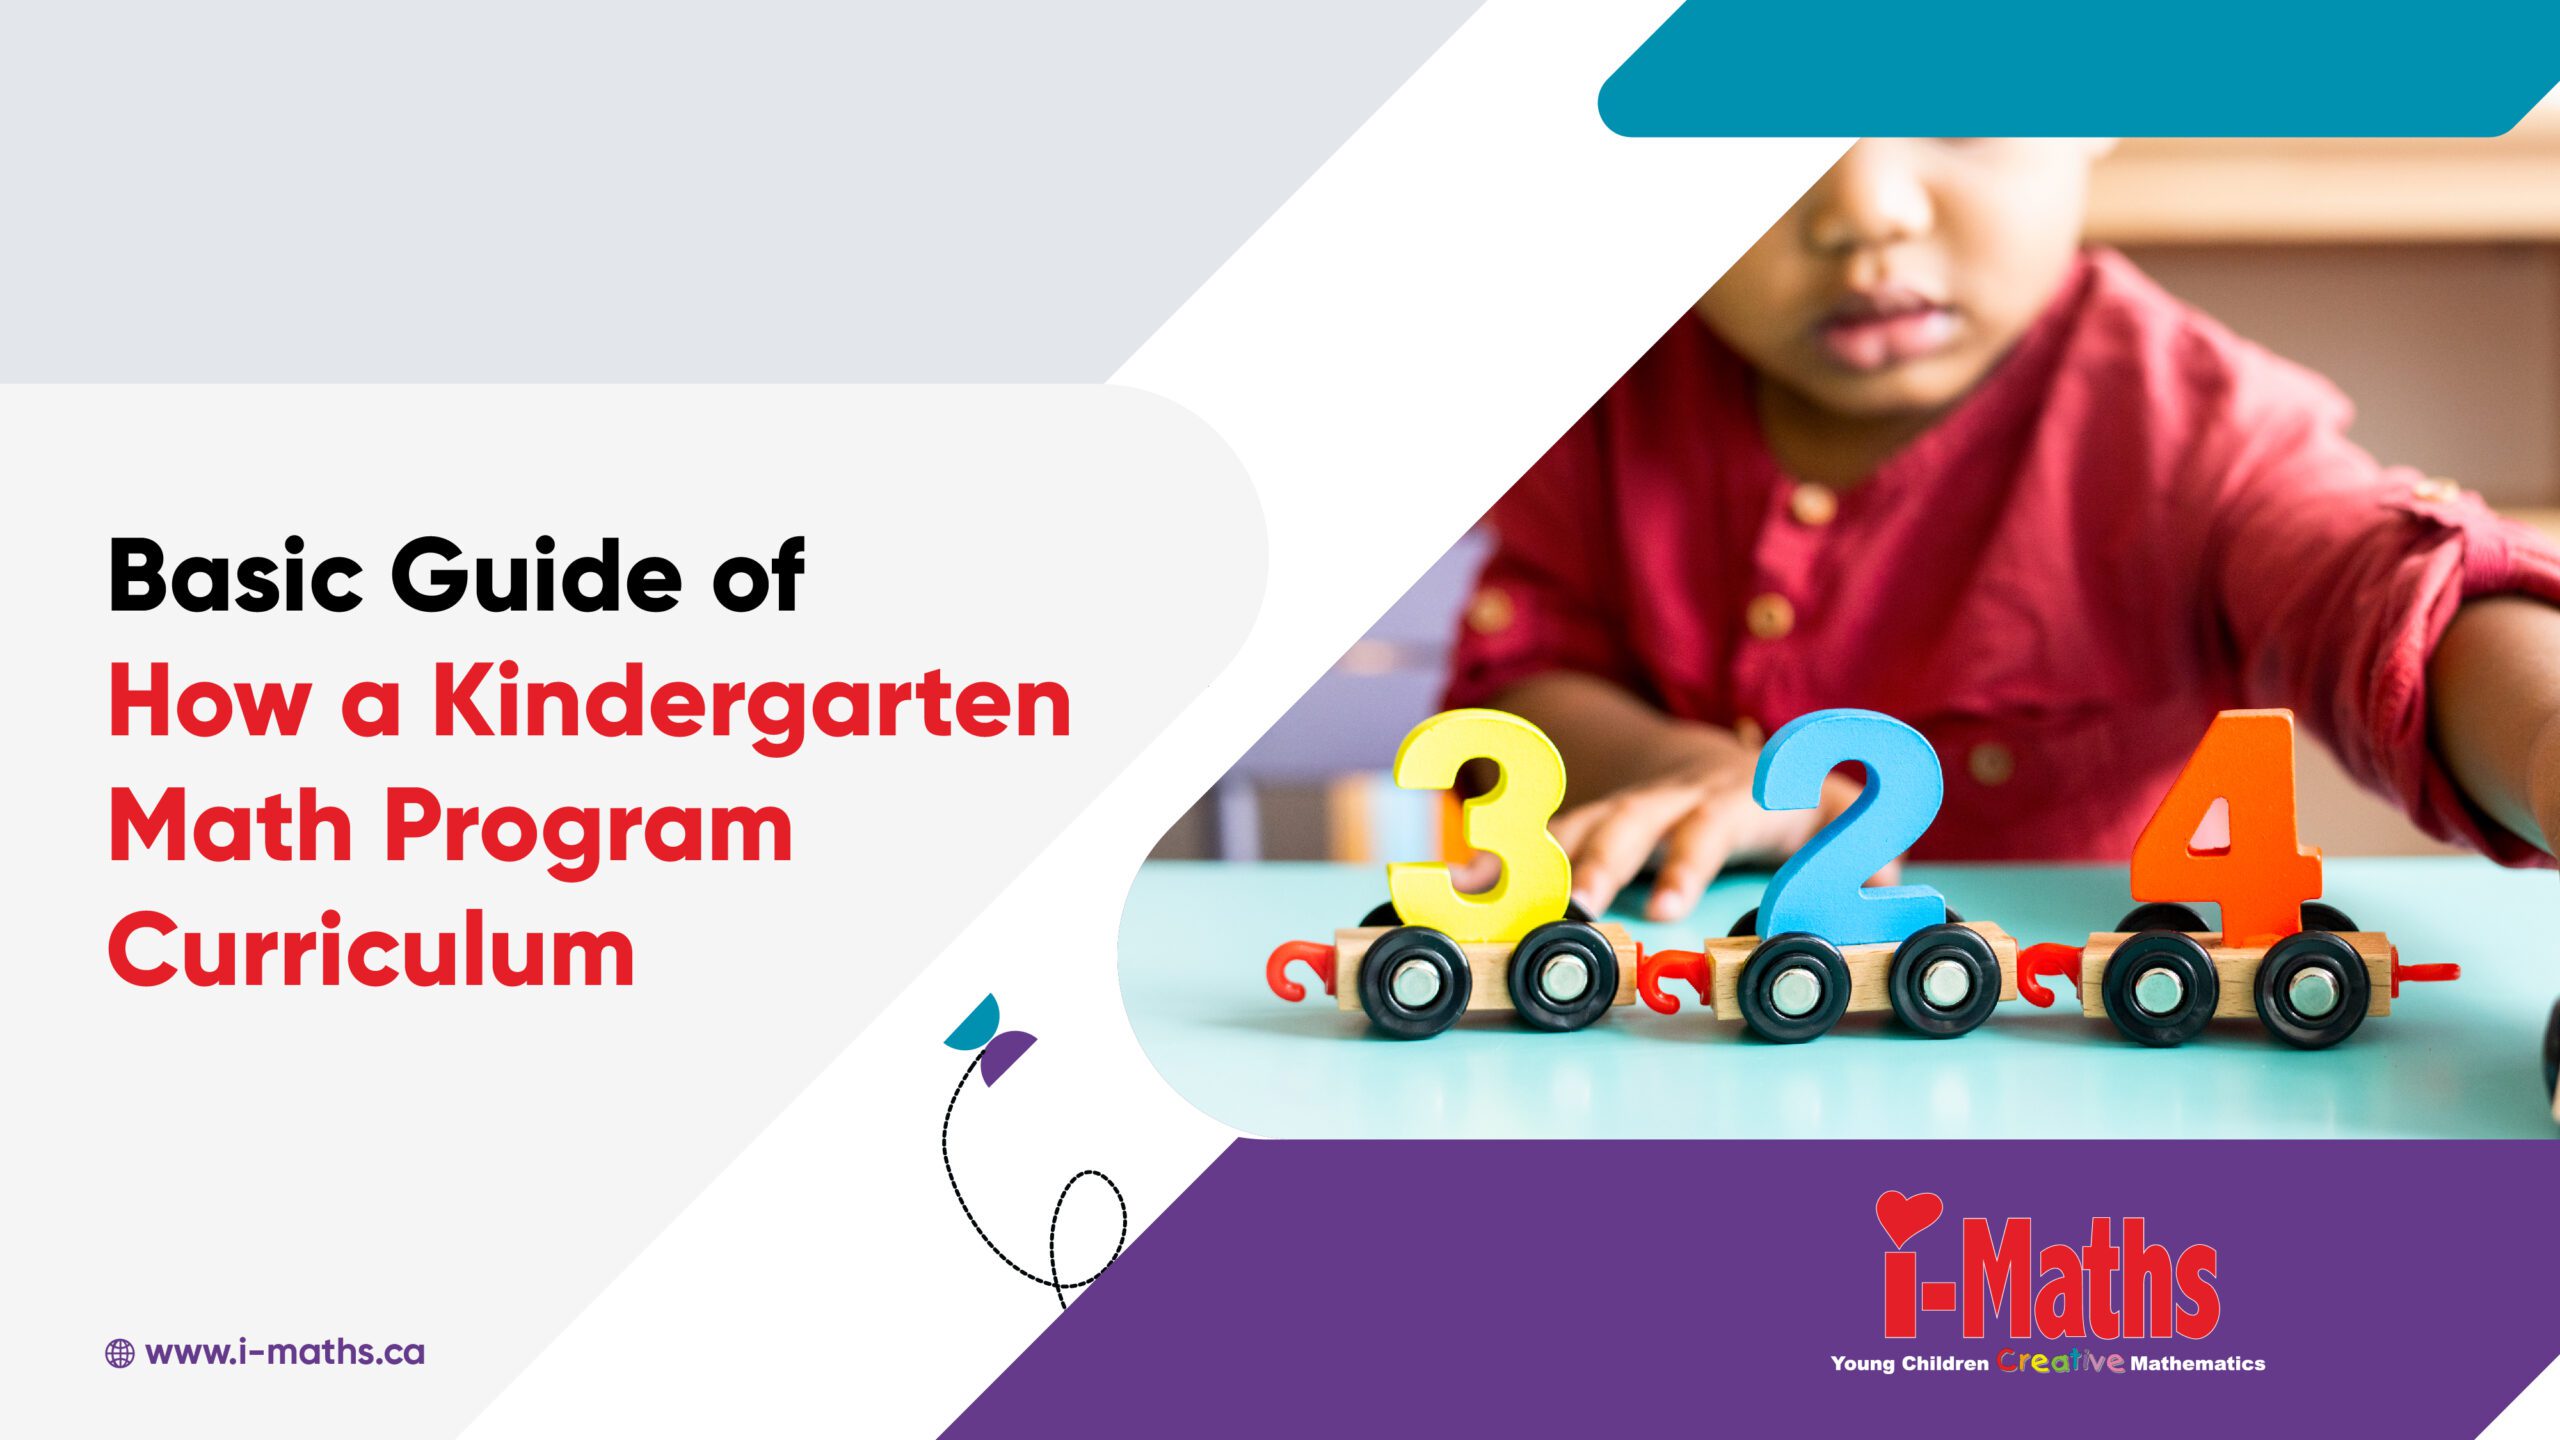 A Basic Guide of How a Kindergarten Math Program Curriculum Should Look Like for Your Kid, at Any Math Learning Center!